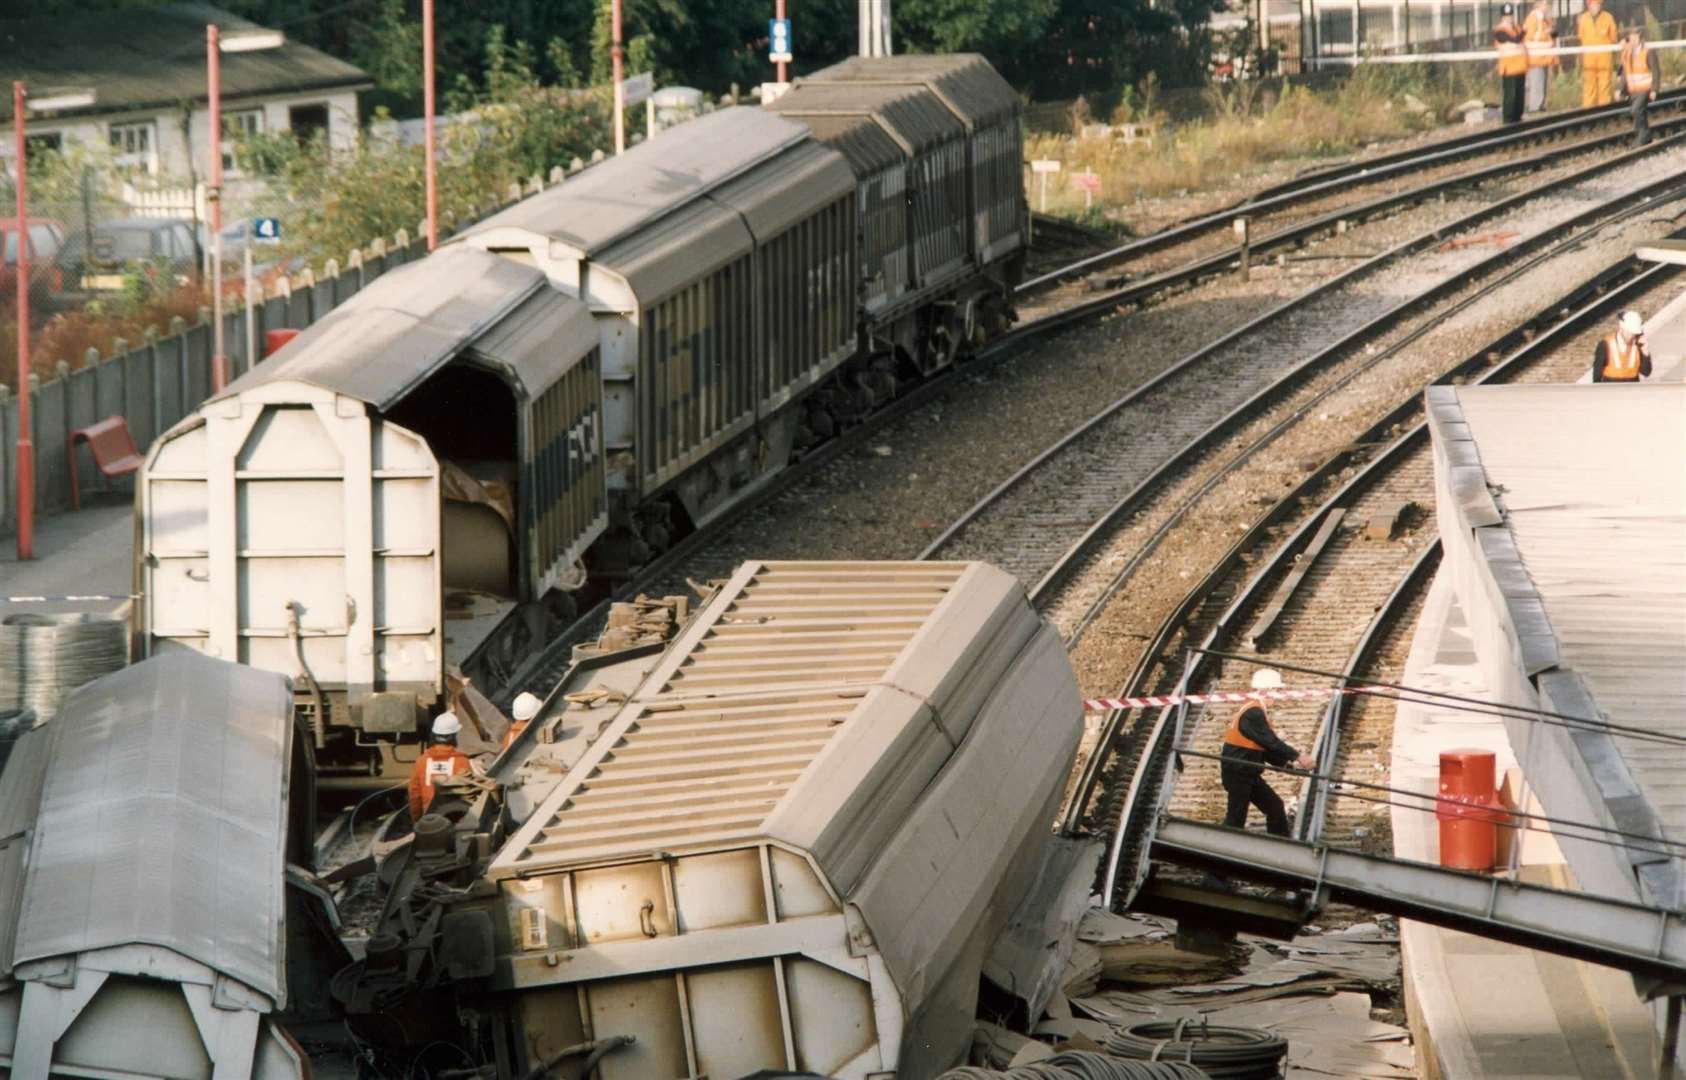 The overturned freight train at Maidstone East train station in 1993